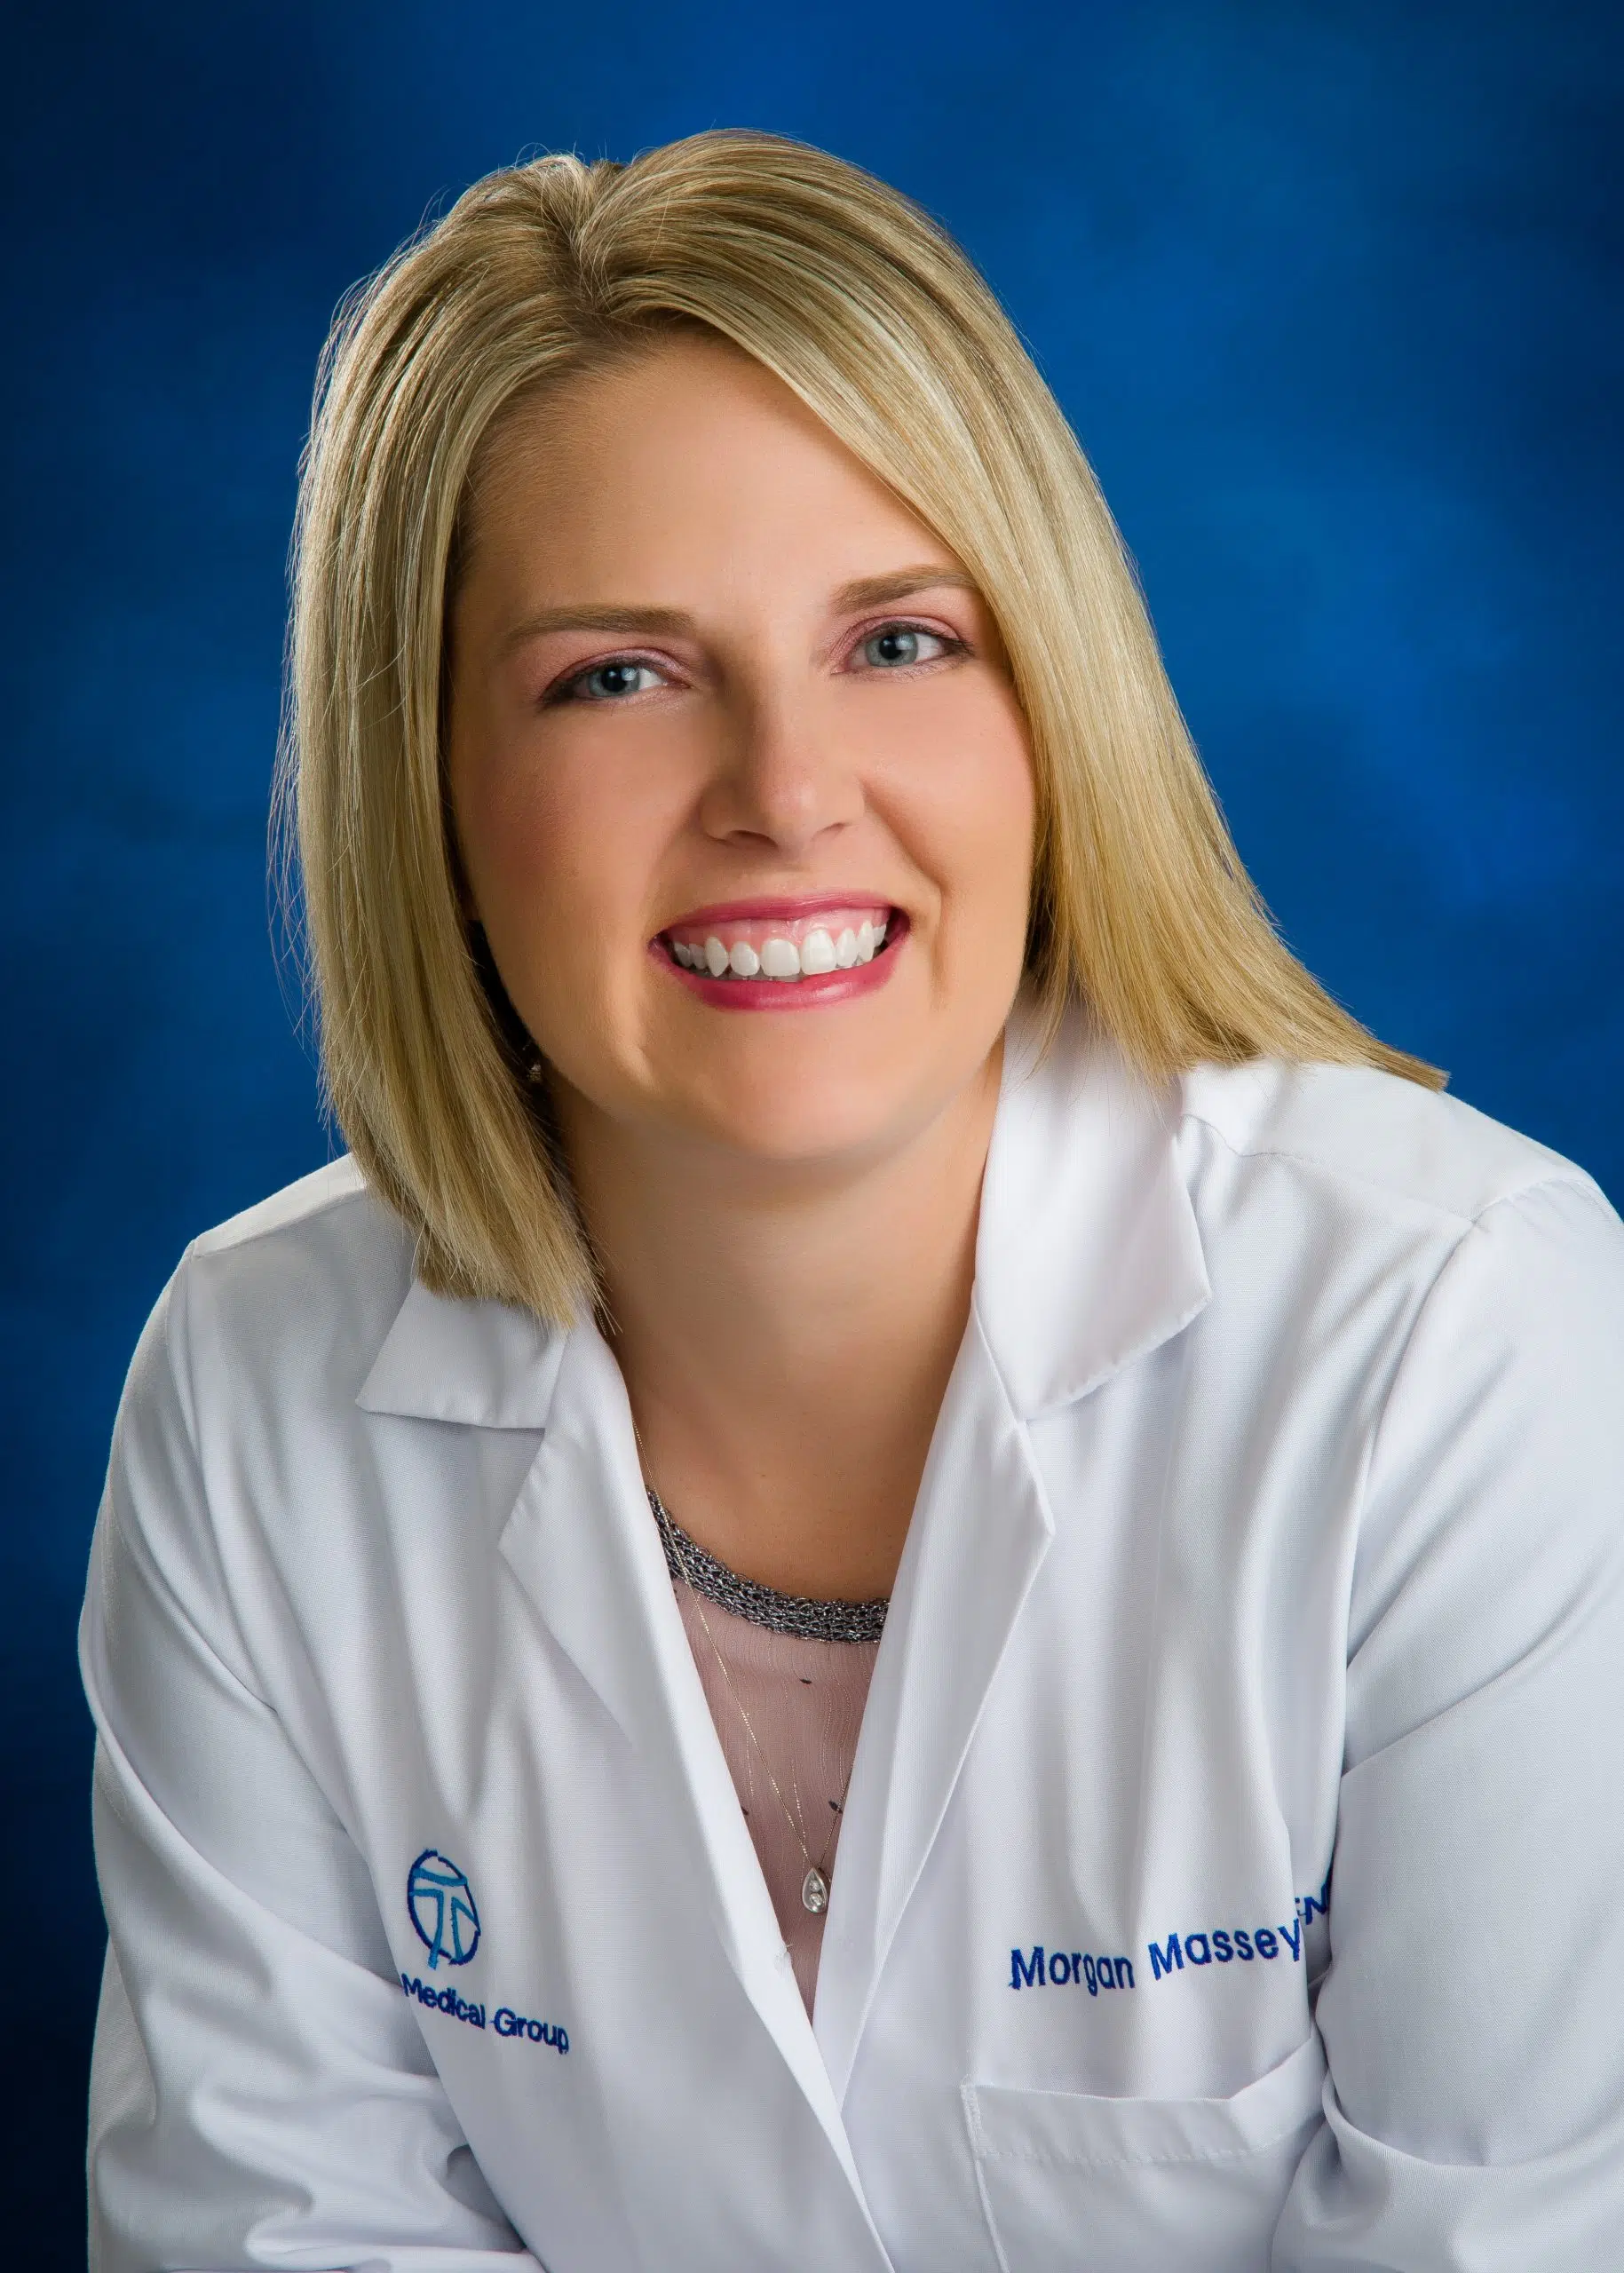  HSHS Medical Group Awards Provider Of The Month to Morgan Massey, APRN 